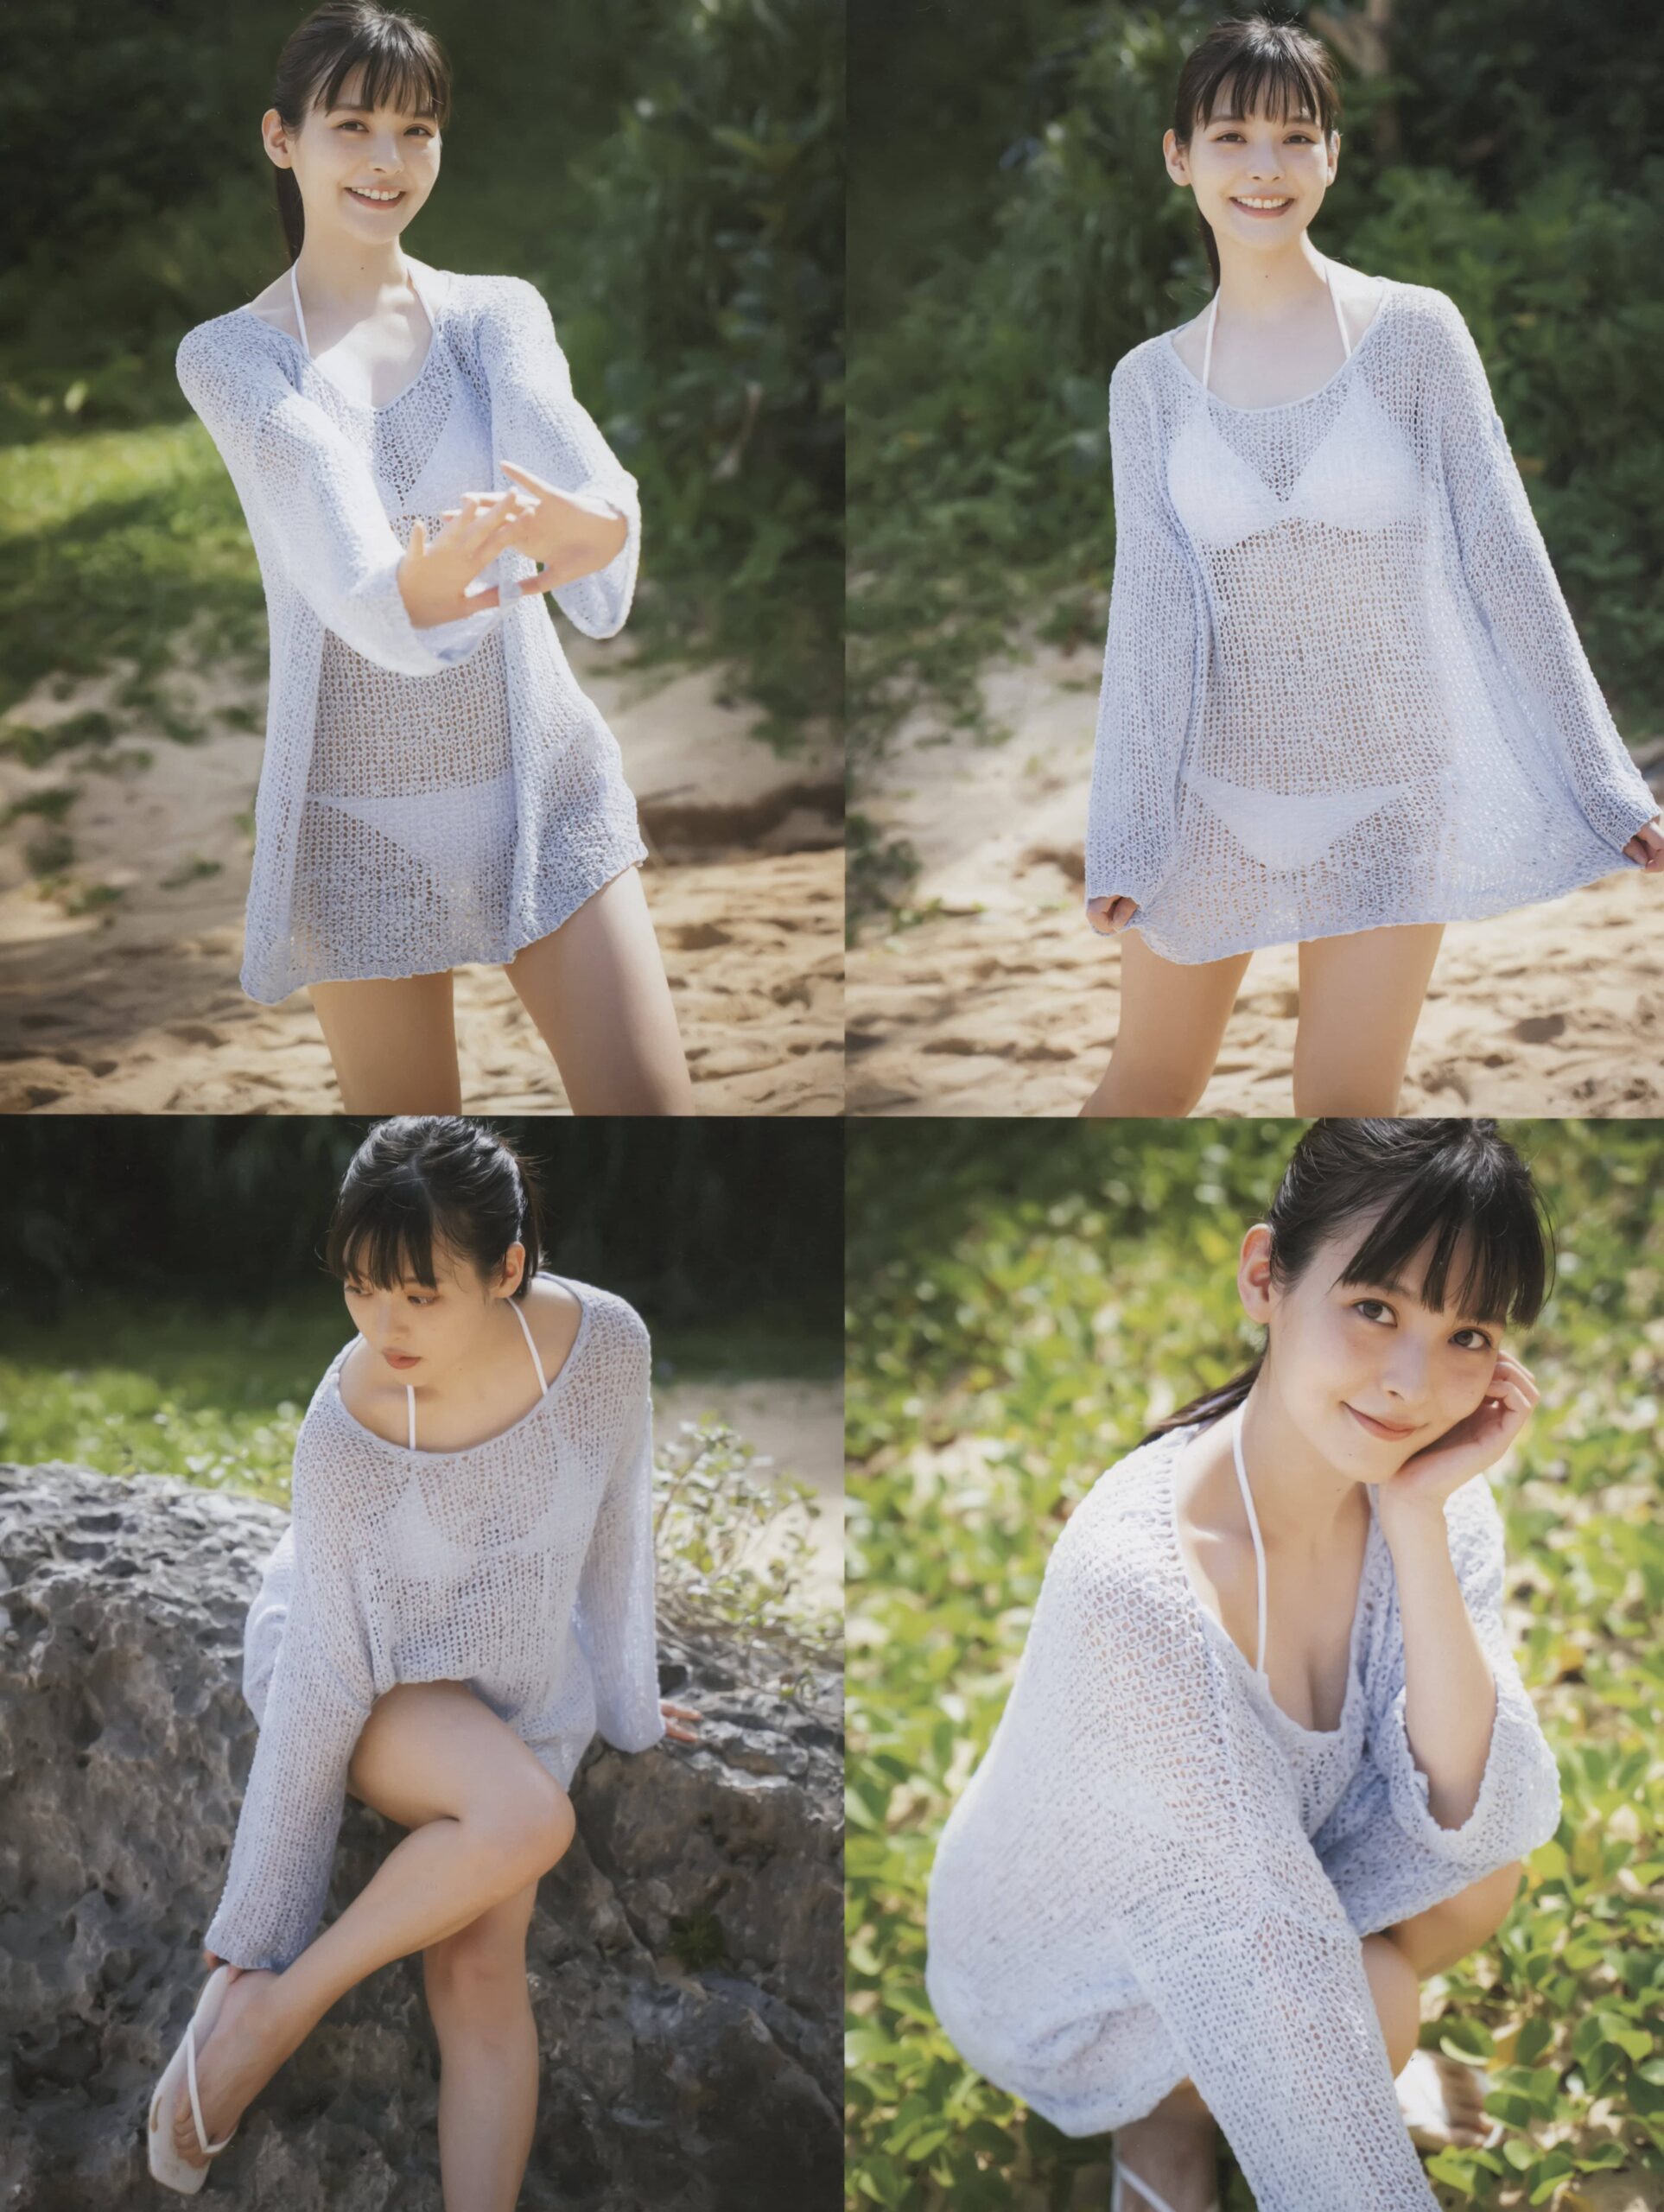 This is the sample picture from Sumire Uesaka｜上坂すみれ - すみれのゆめ post. Click here to see image full size.